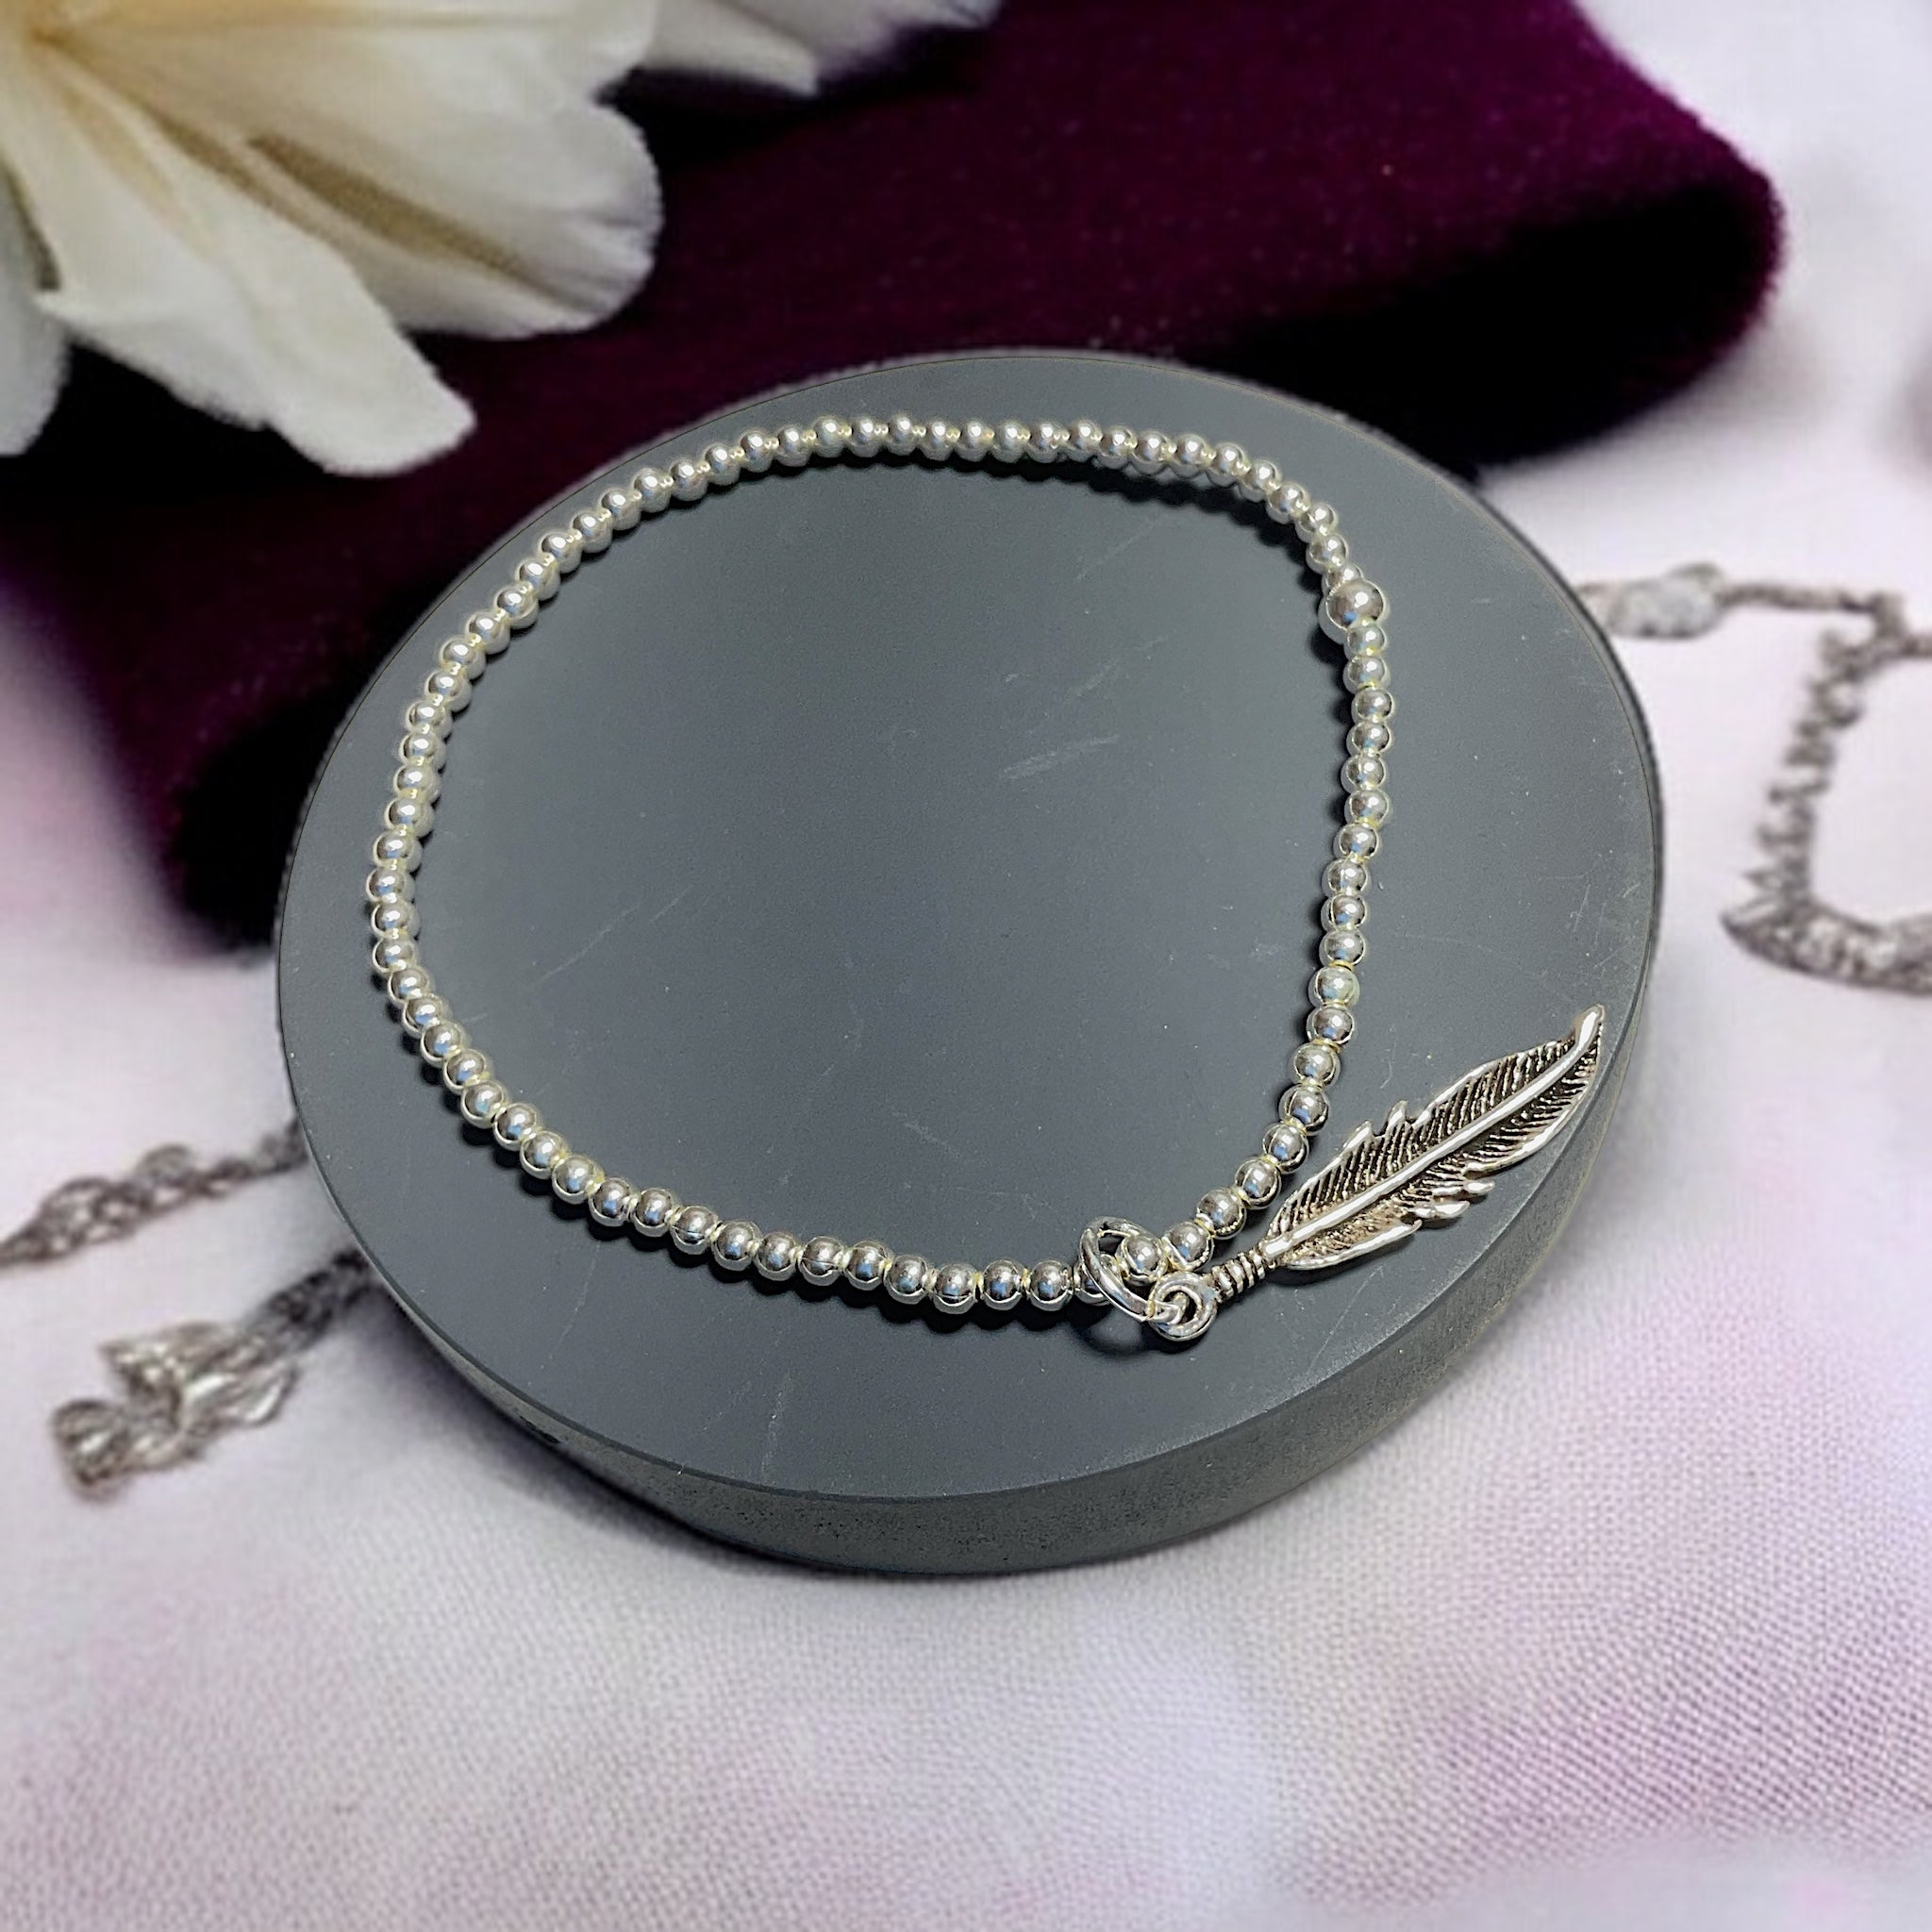 a necklace with a feather charm on it